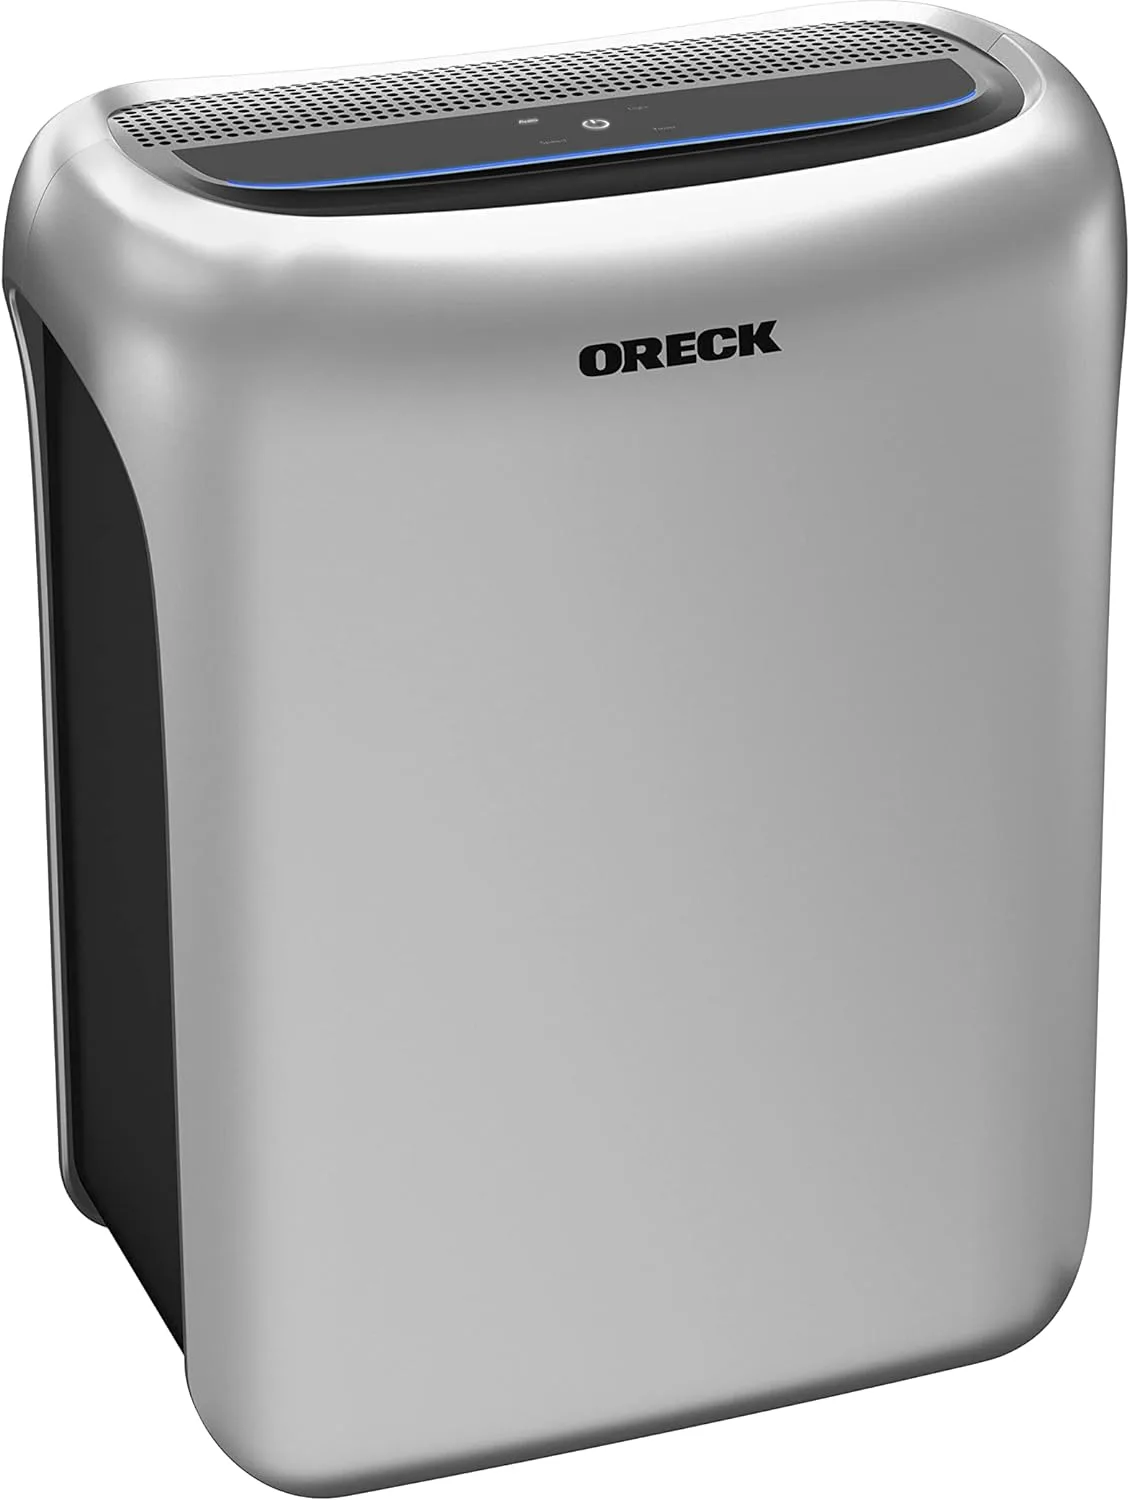 Oreck Air Purifiers:  Reviewed